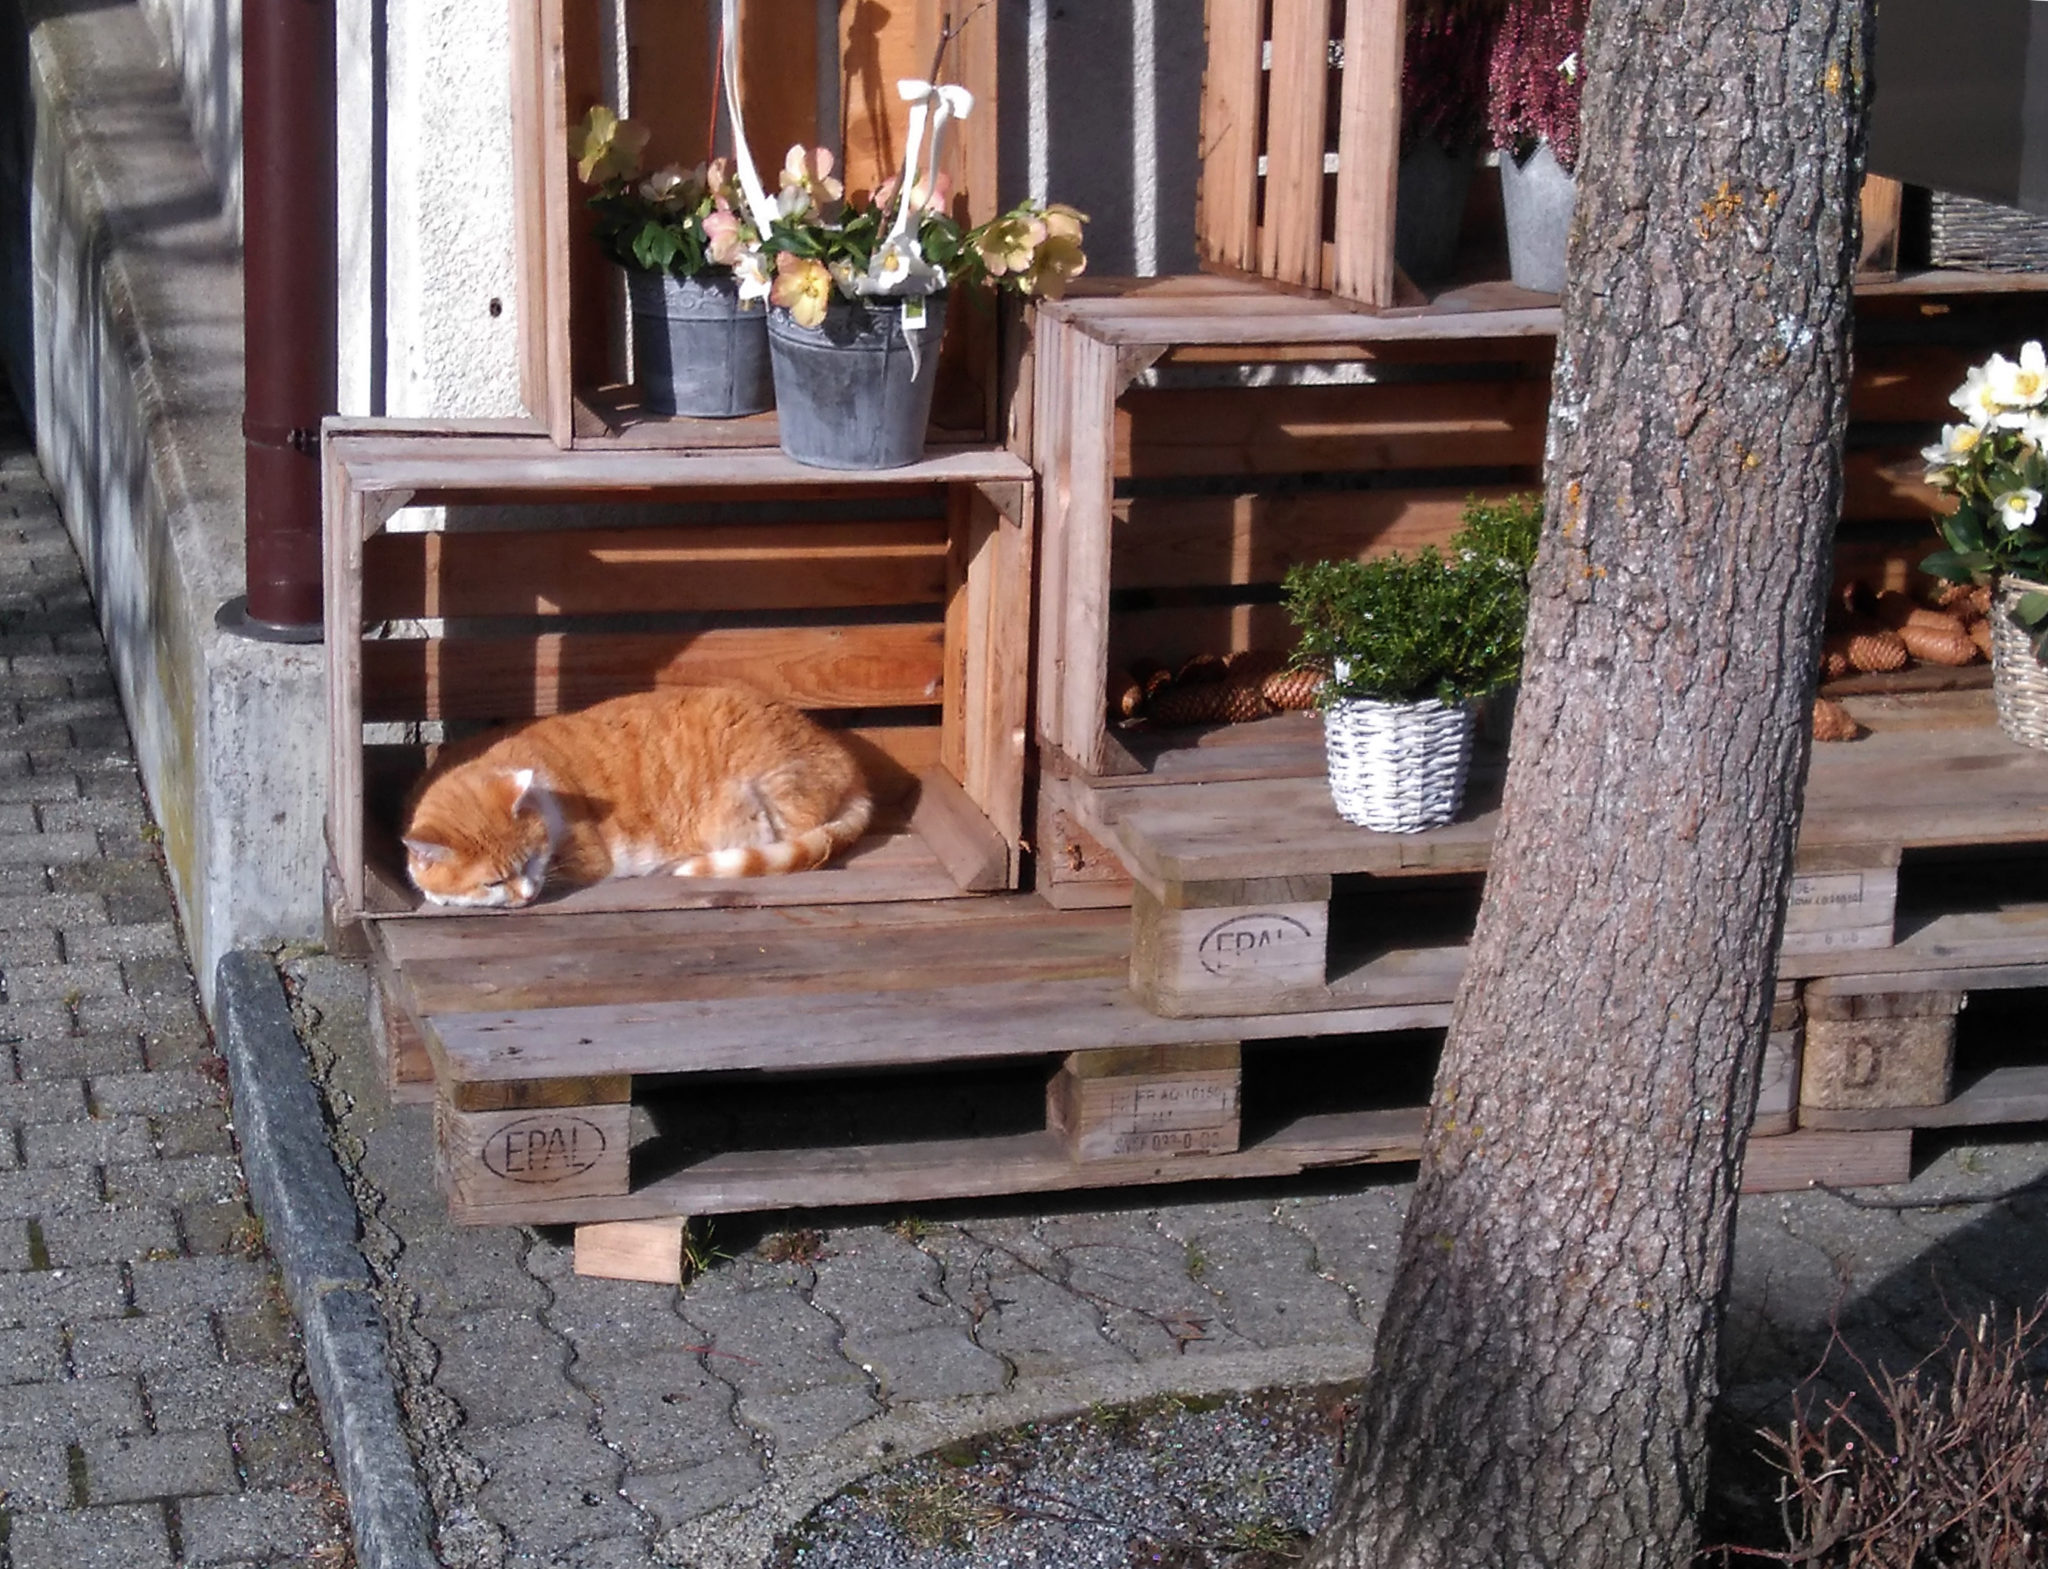 The red cat sleeping in the sun in winter